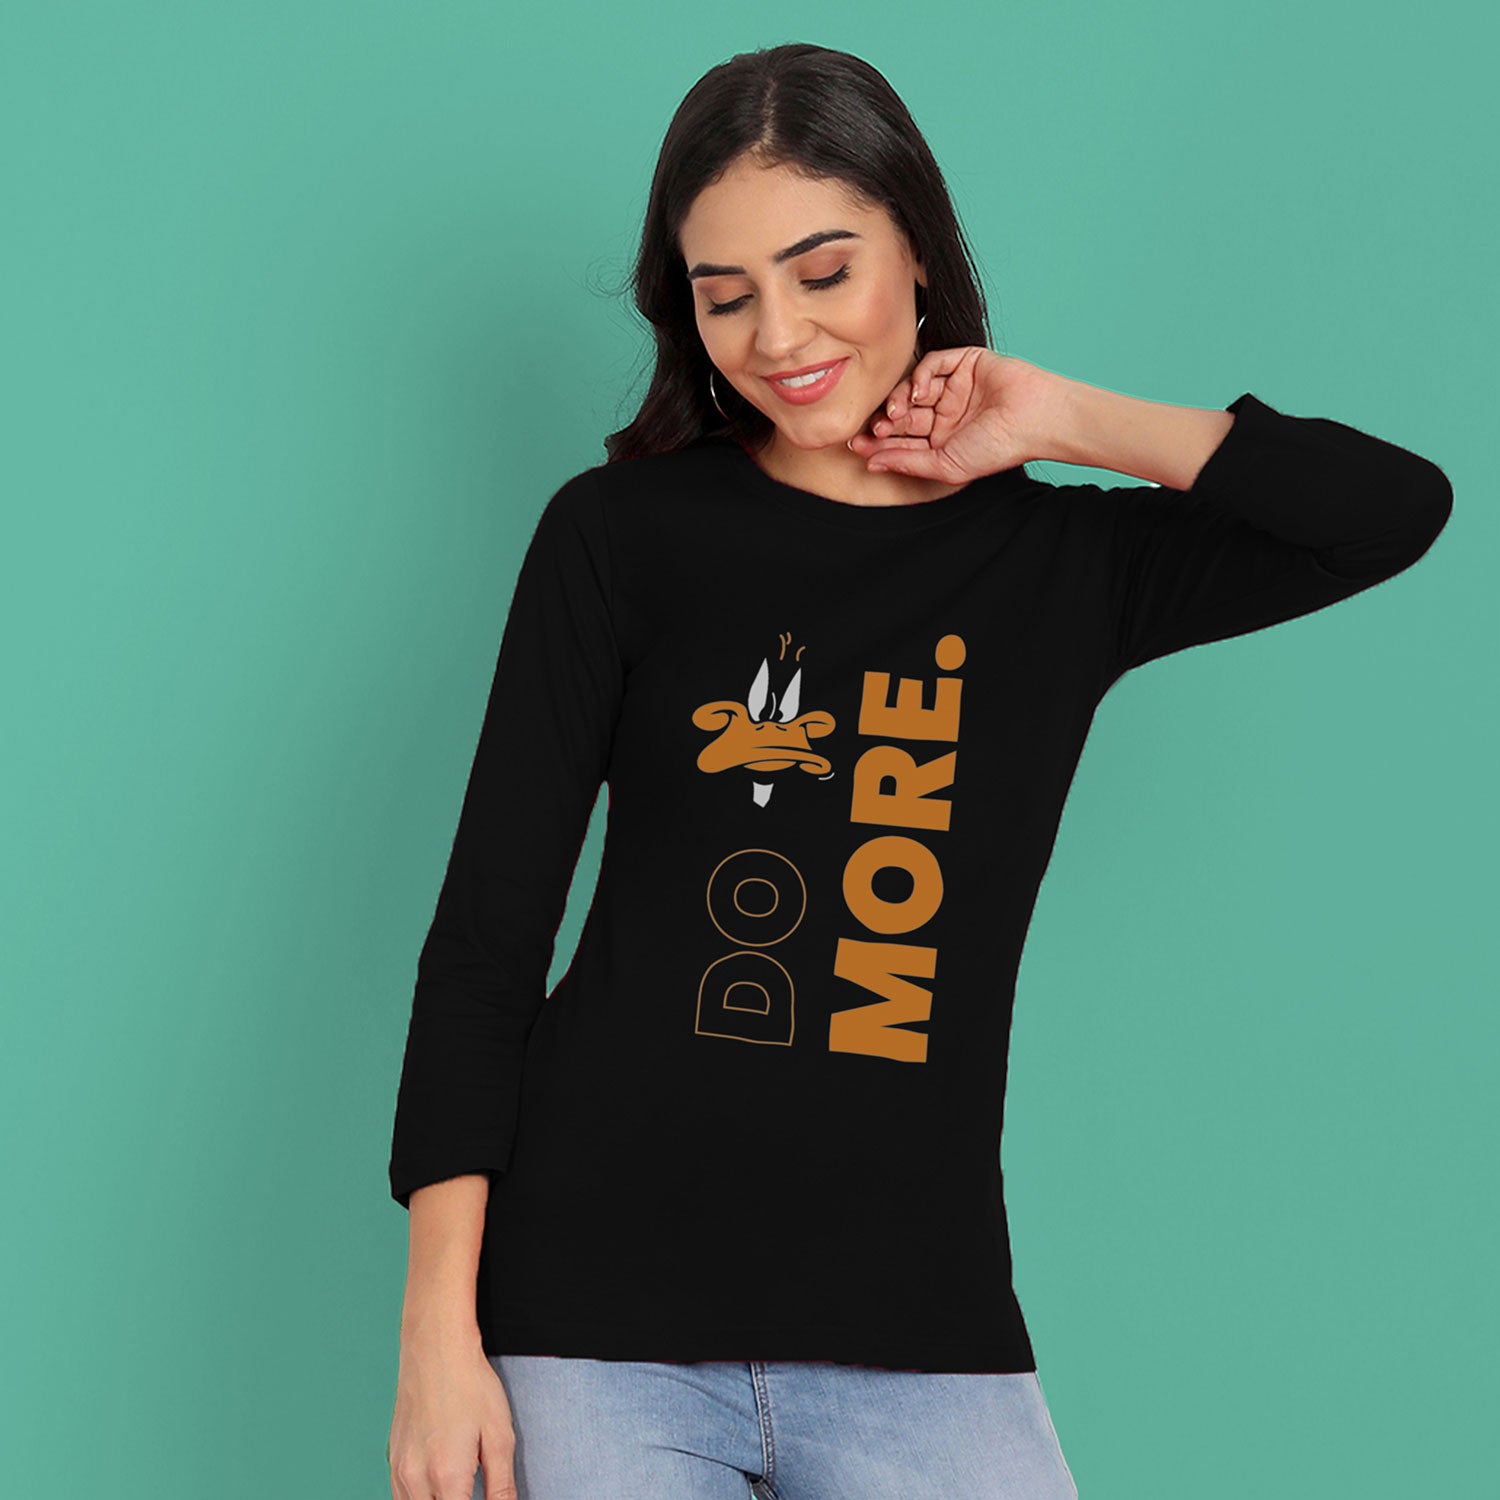 Do More Printed 3/4 Sleeve T-shirt For Girls